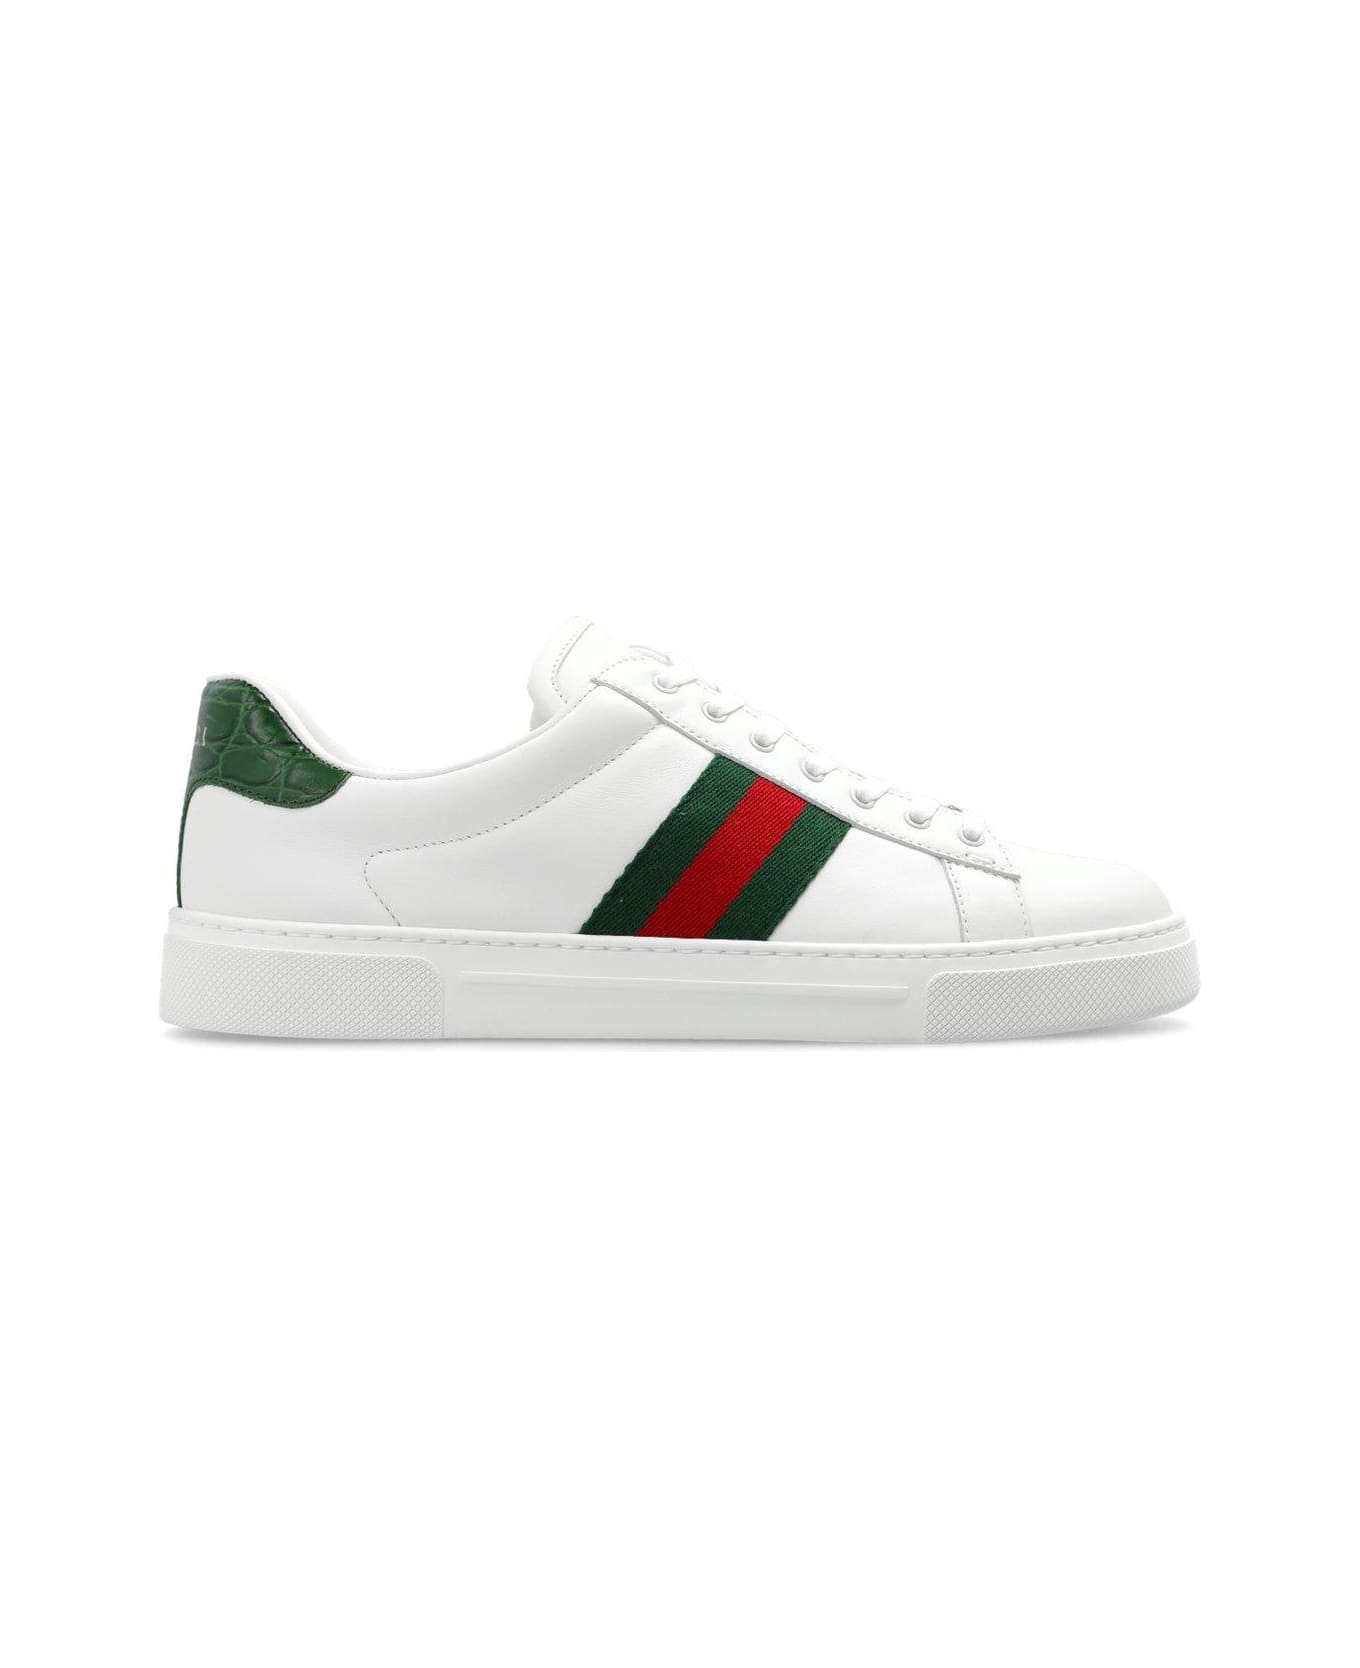 Gucci Ace Low-top Sneakers - Green Ace スニーカー